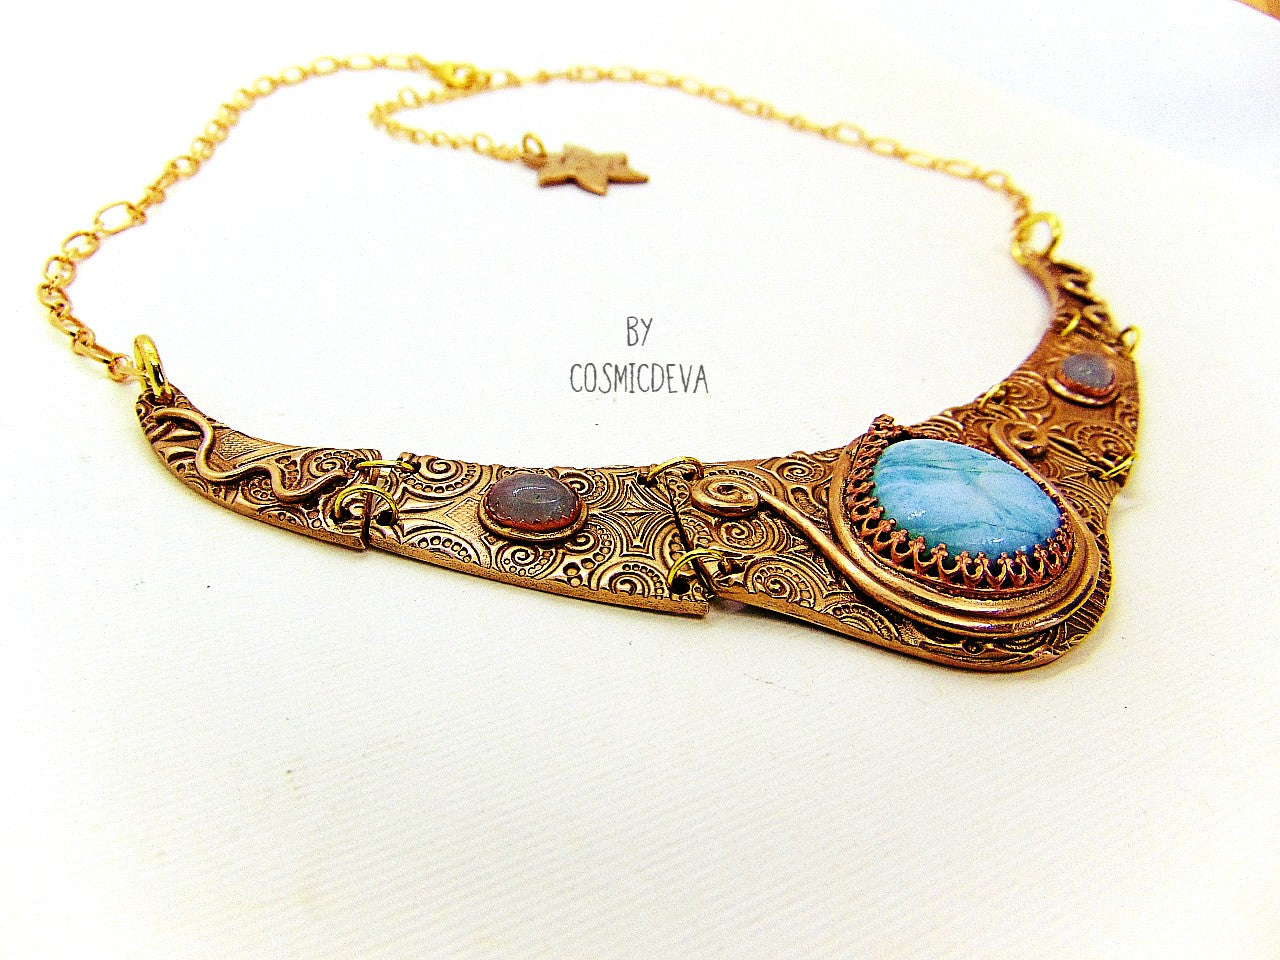 Distinguish yourself with this stunning Ancient Style Choker Collar With Larimar Gold Bronze Necklace. Hand-formed with solid gold bronze, it exudes elegance with the aquamarine and larimar gemstones embedded in its center. Feel luxurious and be the envy of all! A unique adornment that will adore to wear in all occasions.